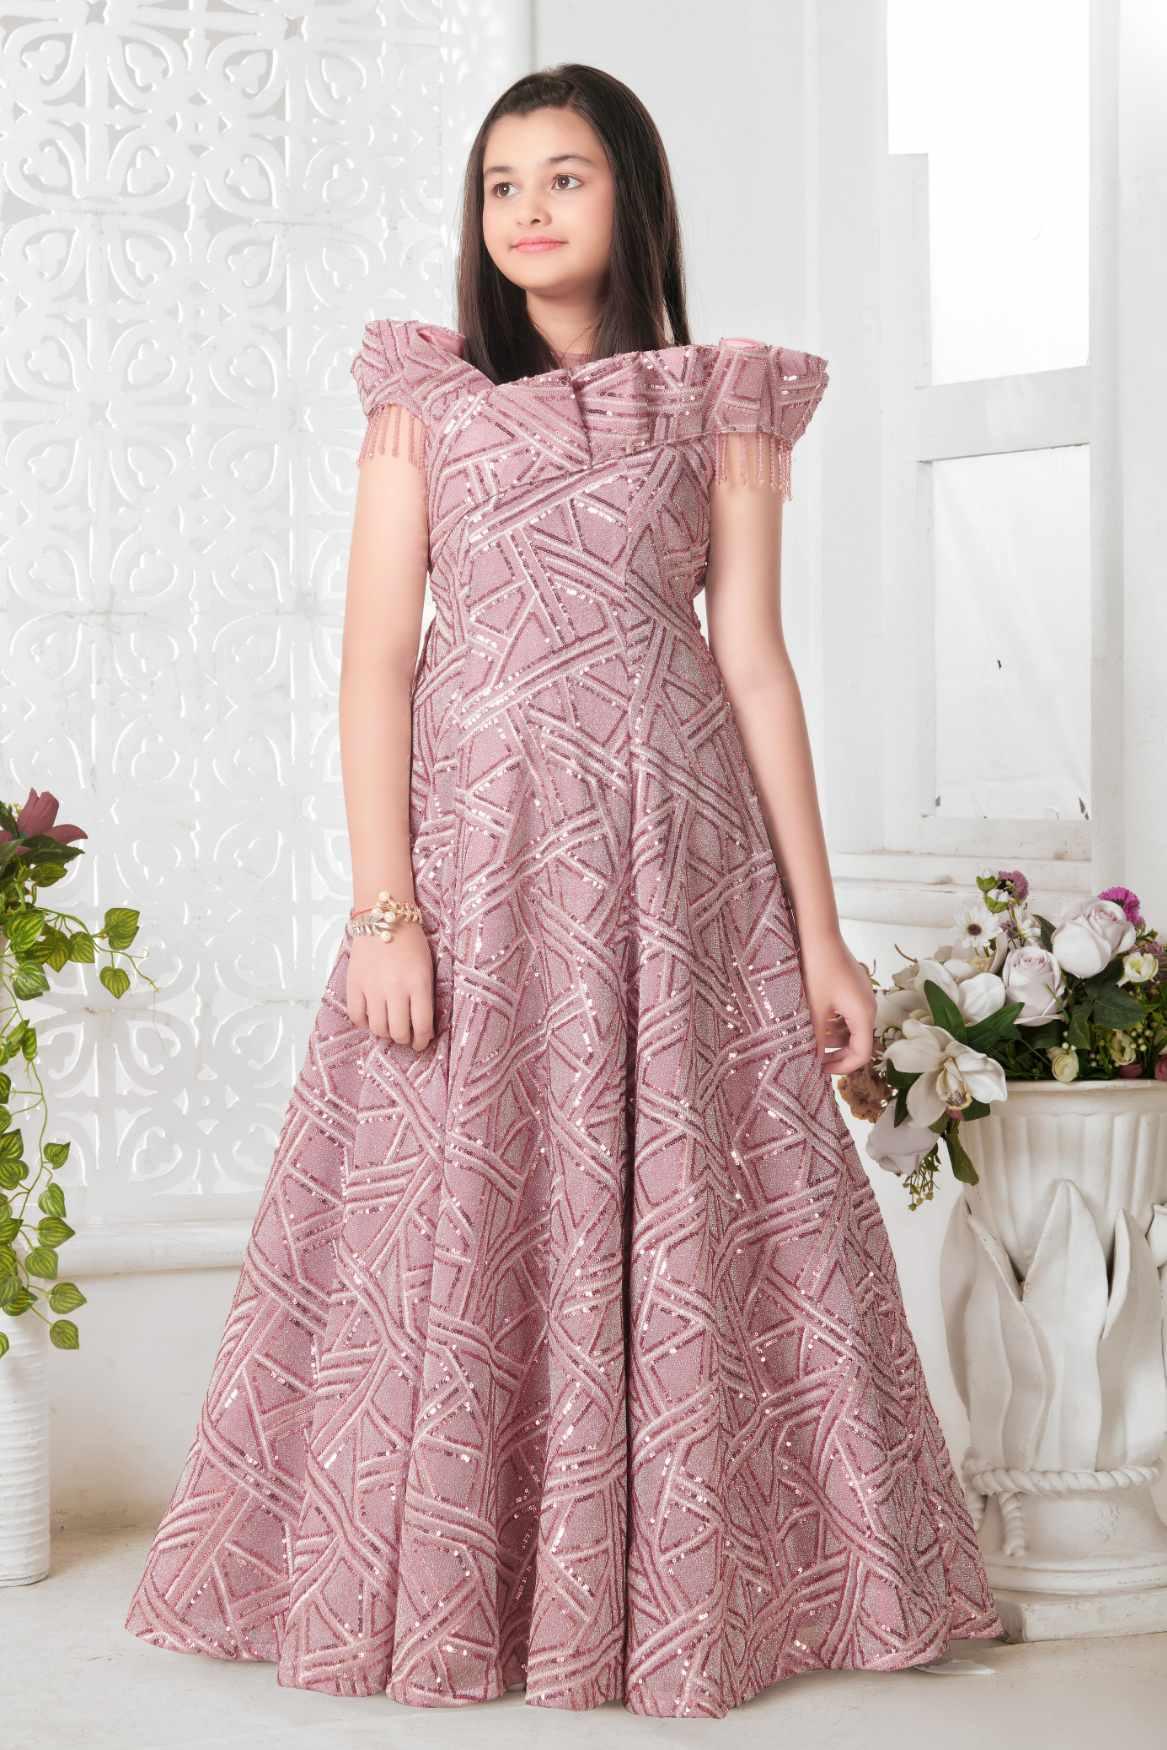 Elegant Pink Embossed Satin Gown With Sequin Work For Girls - Lagorii Kids